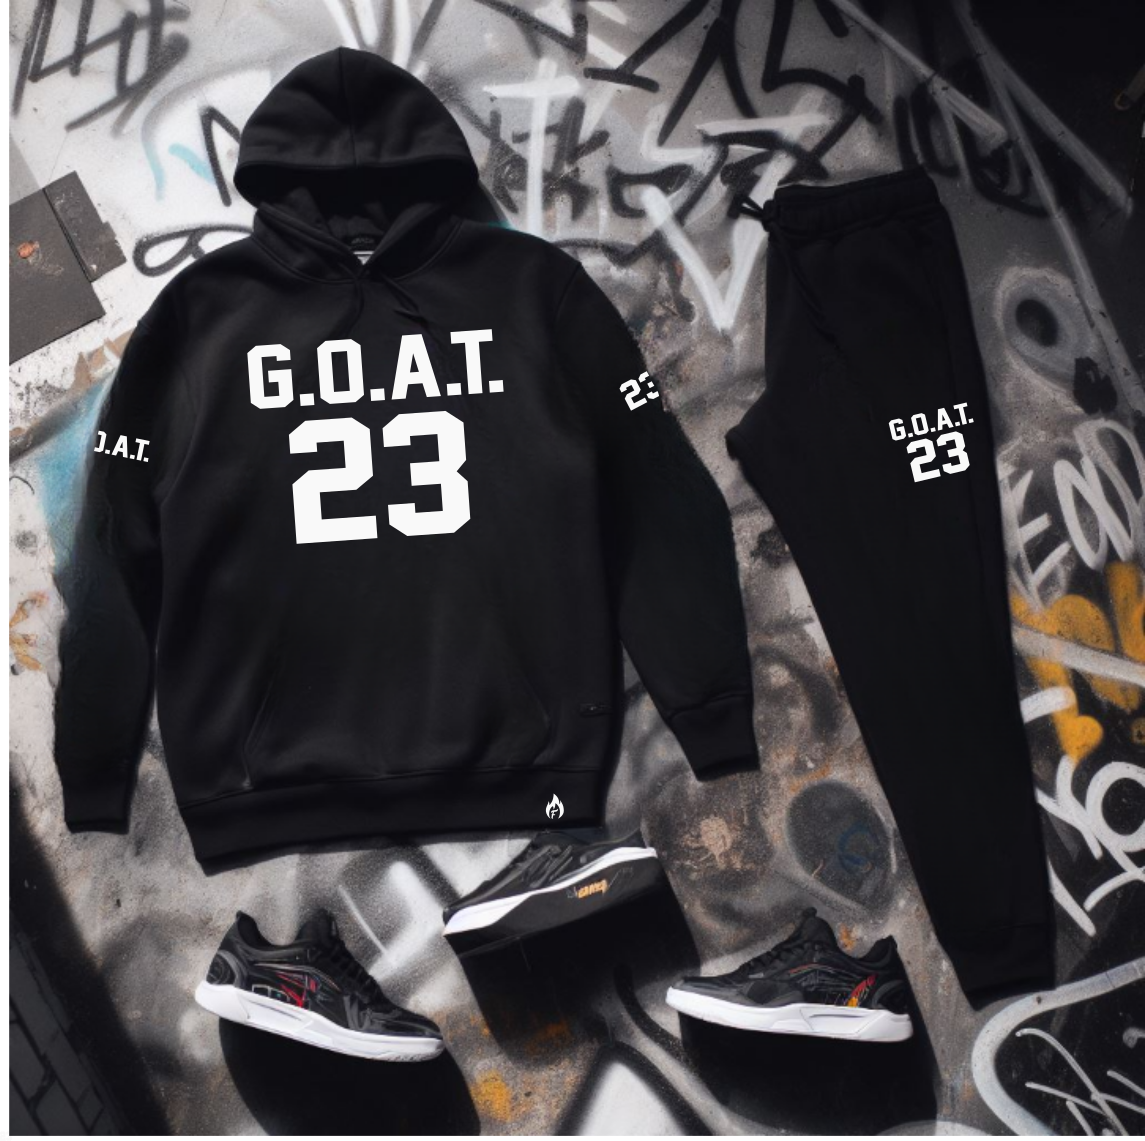 Men's G.O.A.T. 23 Black Sweatsuit Matching Air Jordan Retro 13 Playoffs Sneaker Graphics Hoodie and Joggers